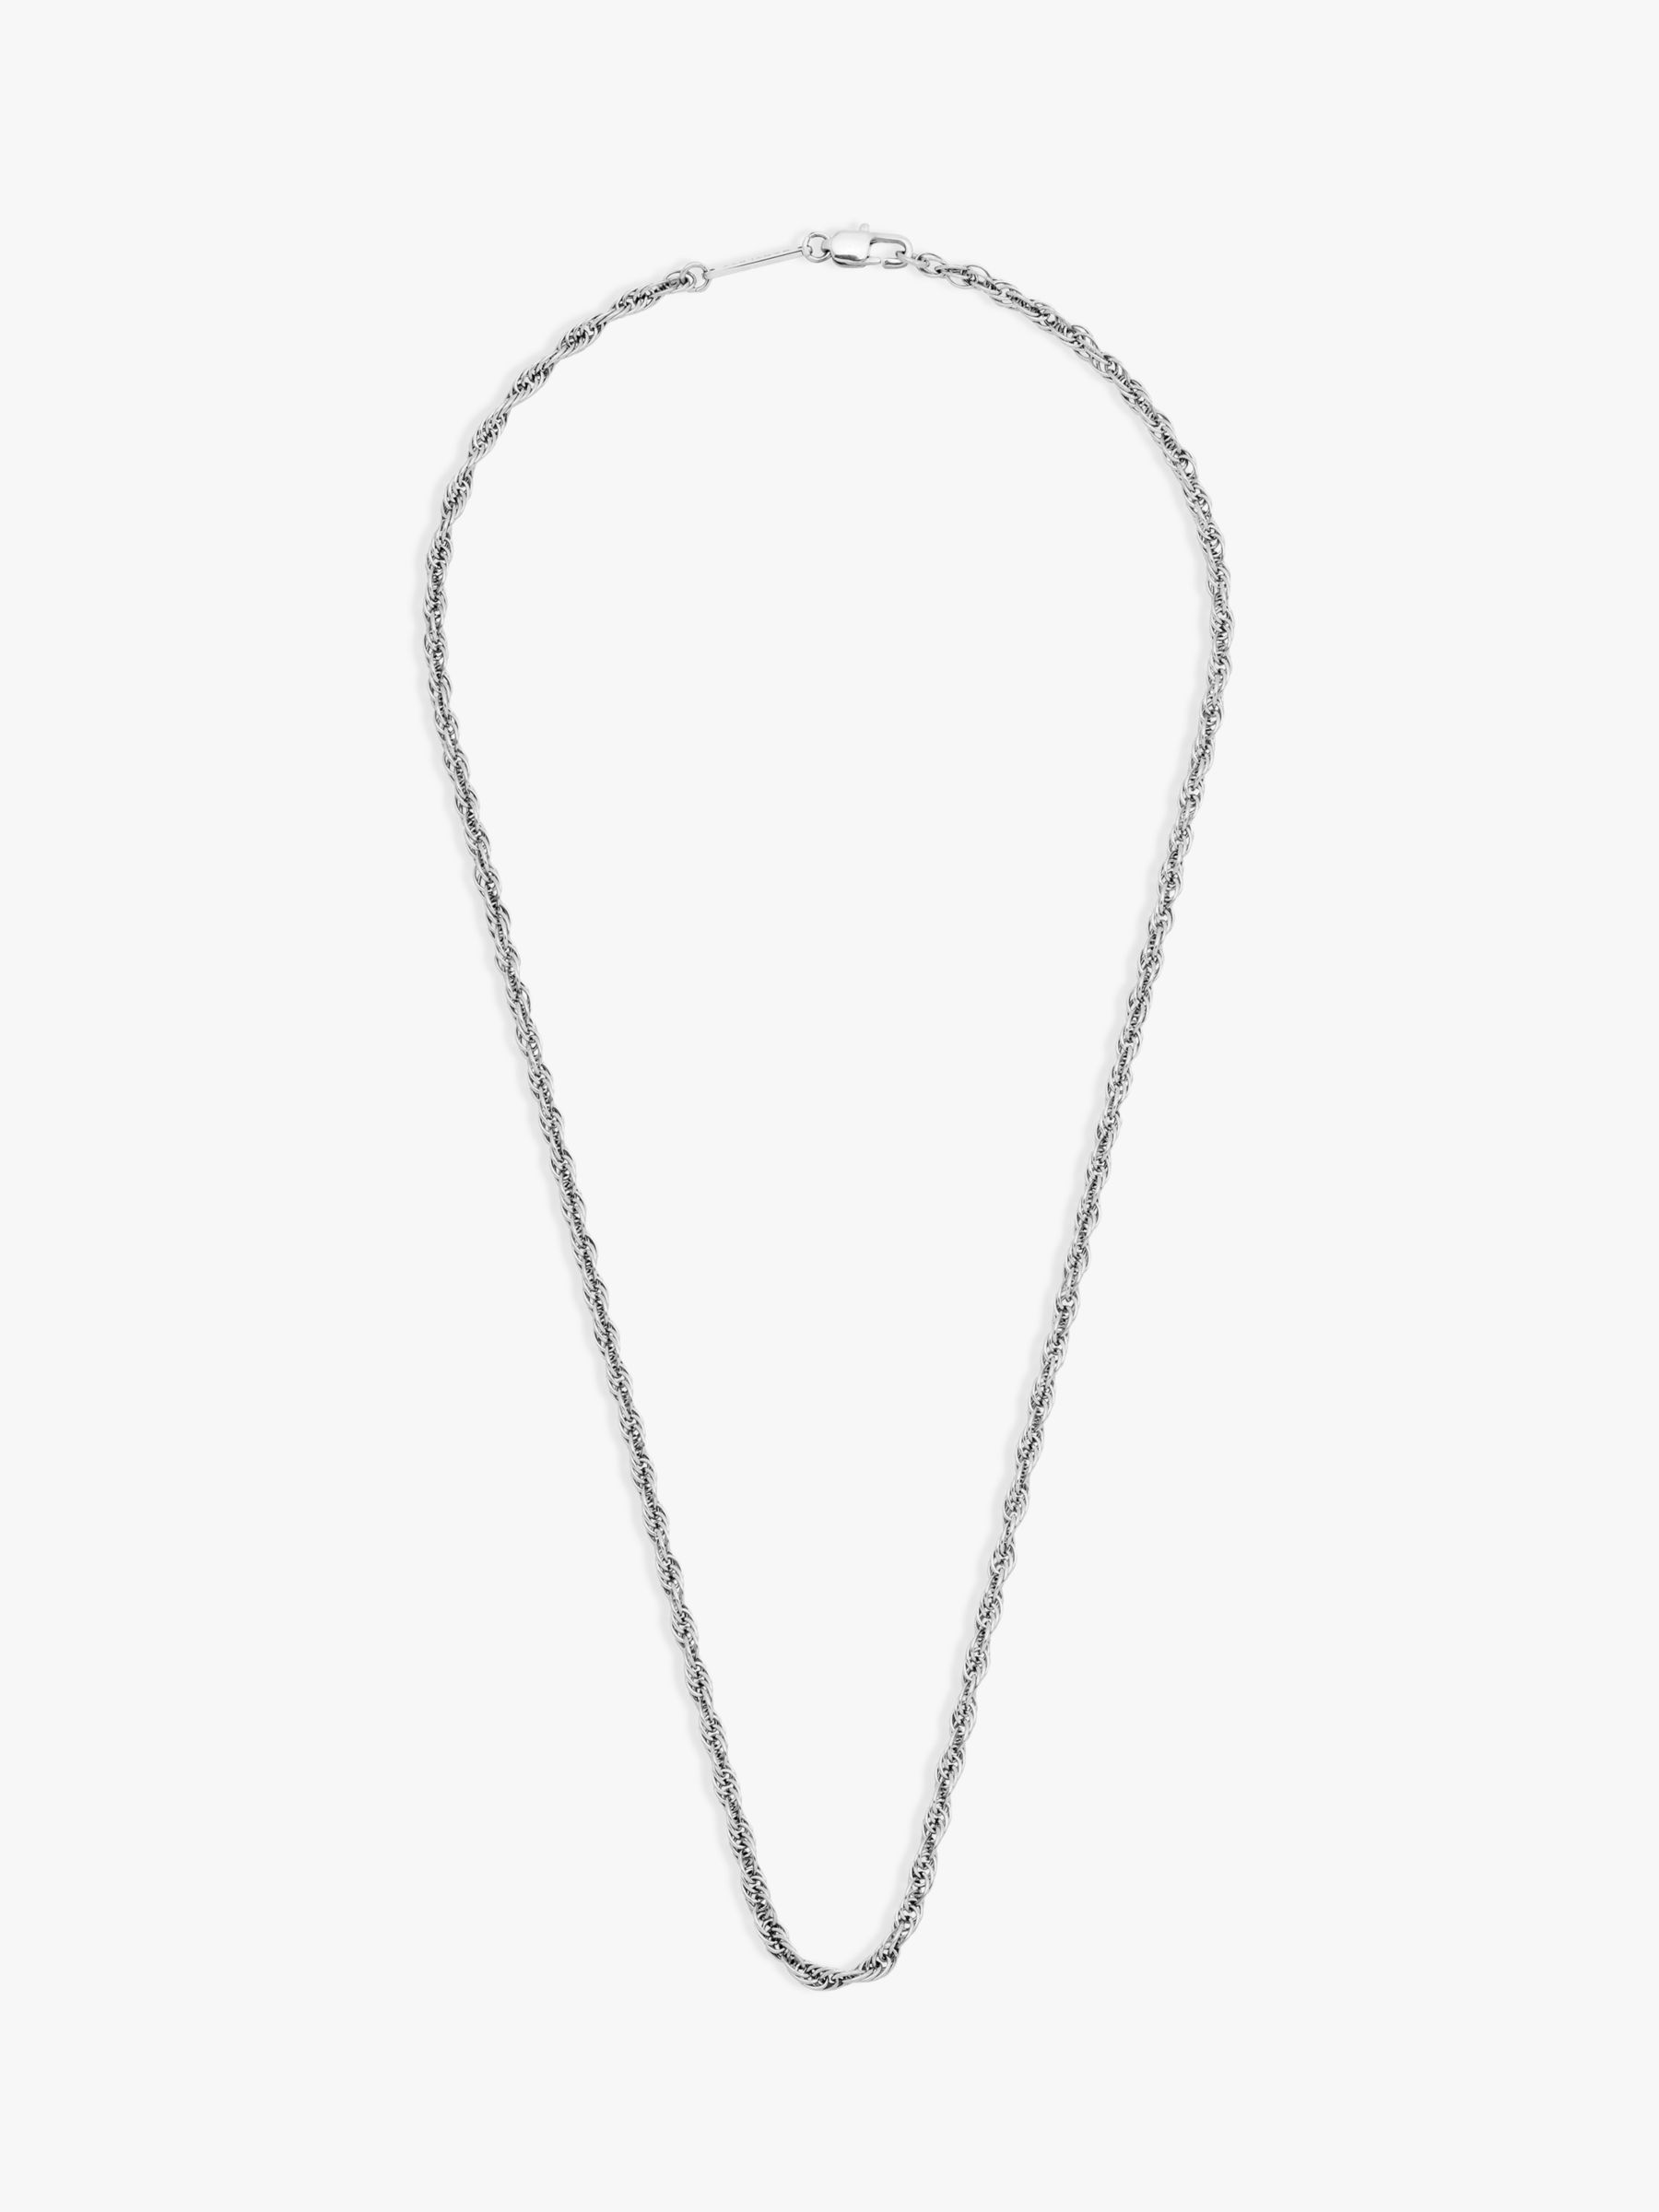 BARTLETT LONDON Men's Rope Chain Necklace, Silver